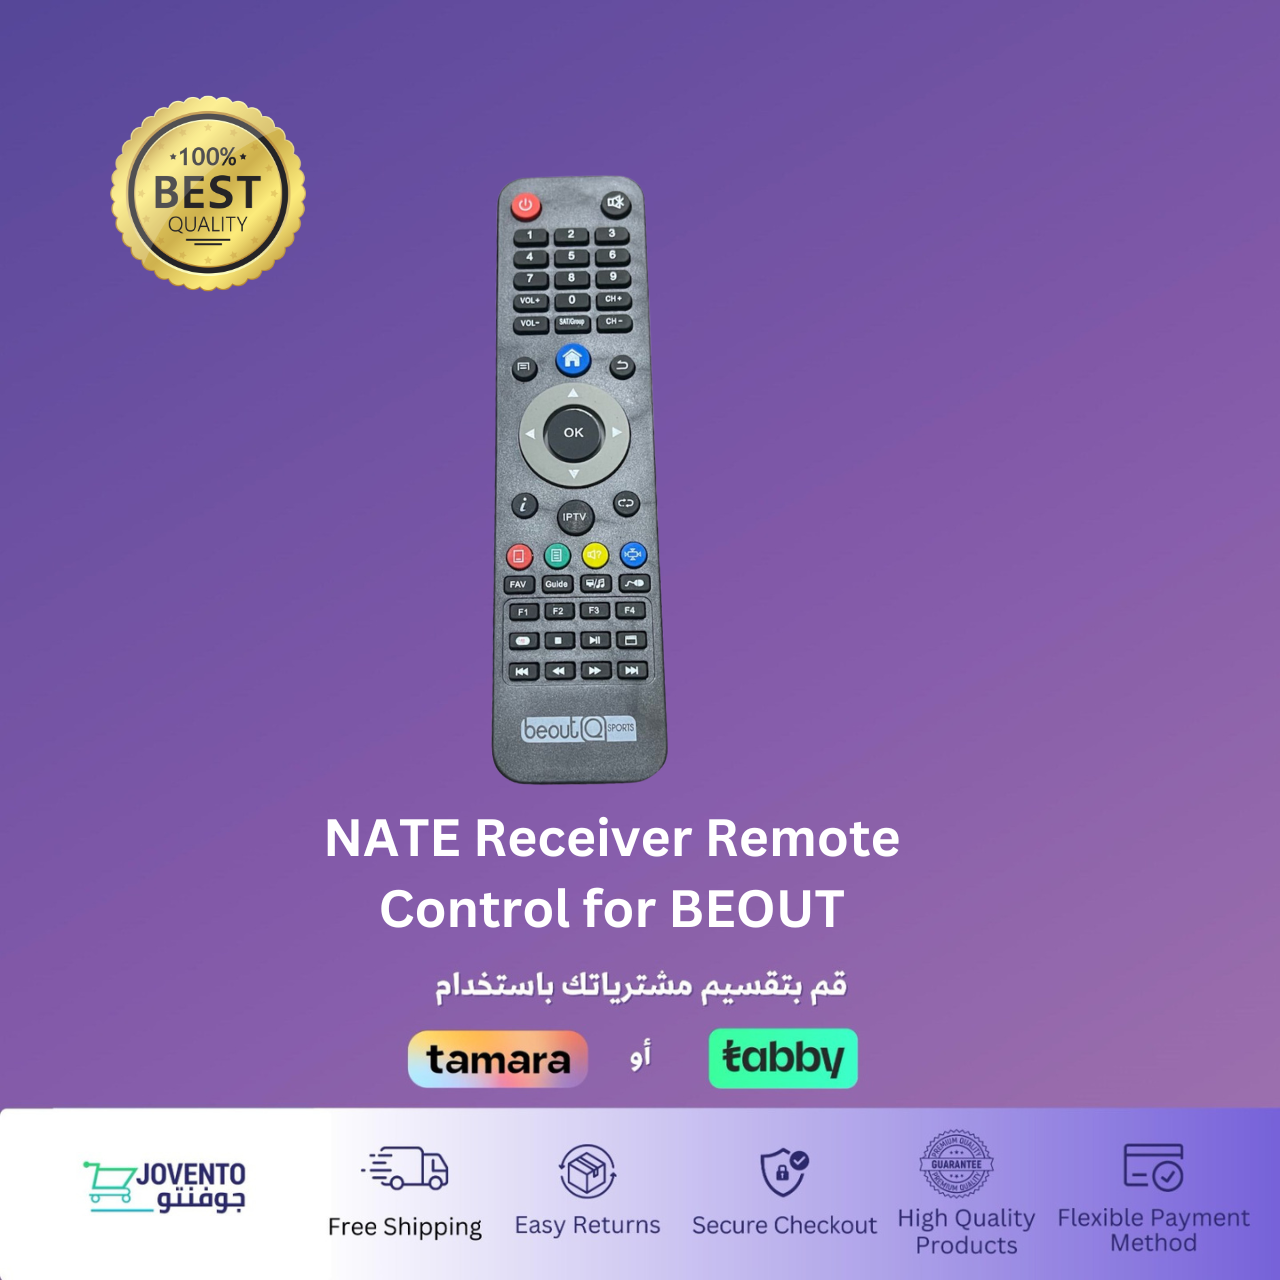 NATE Receiver Remote Control for BEOUT